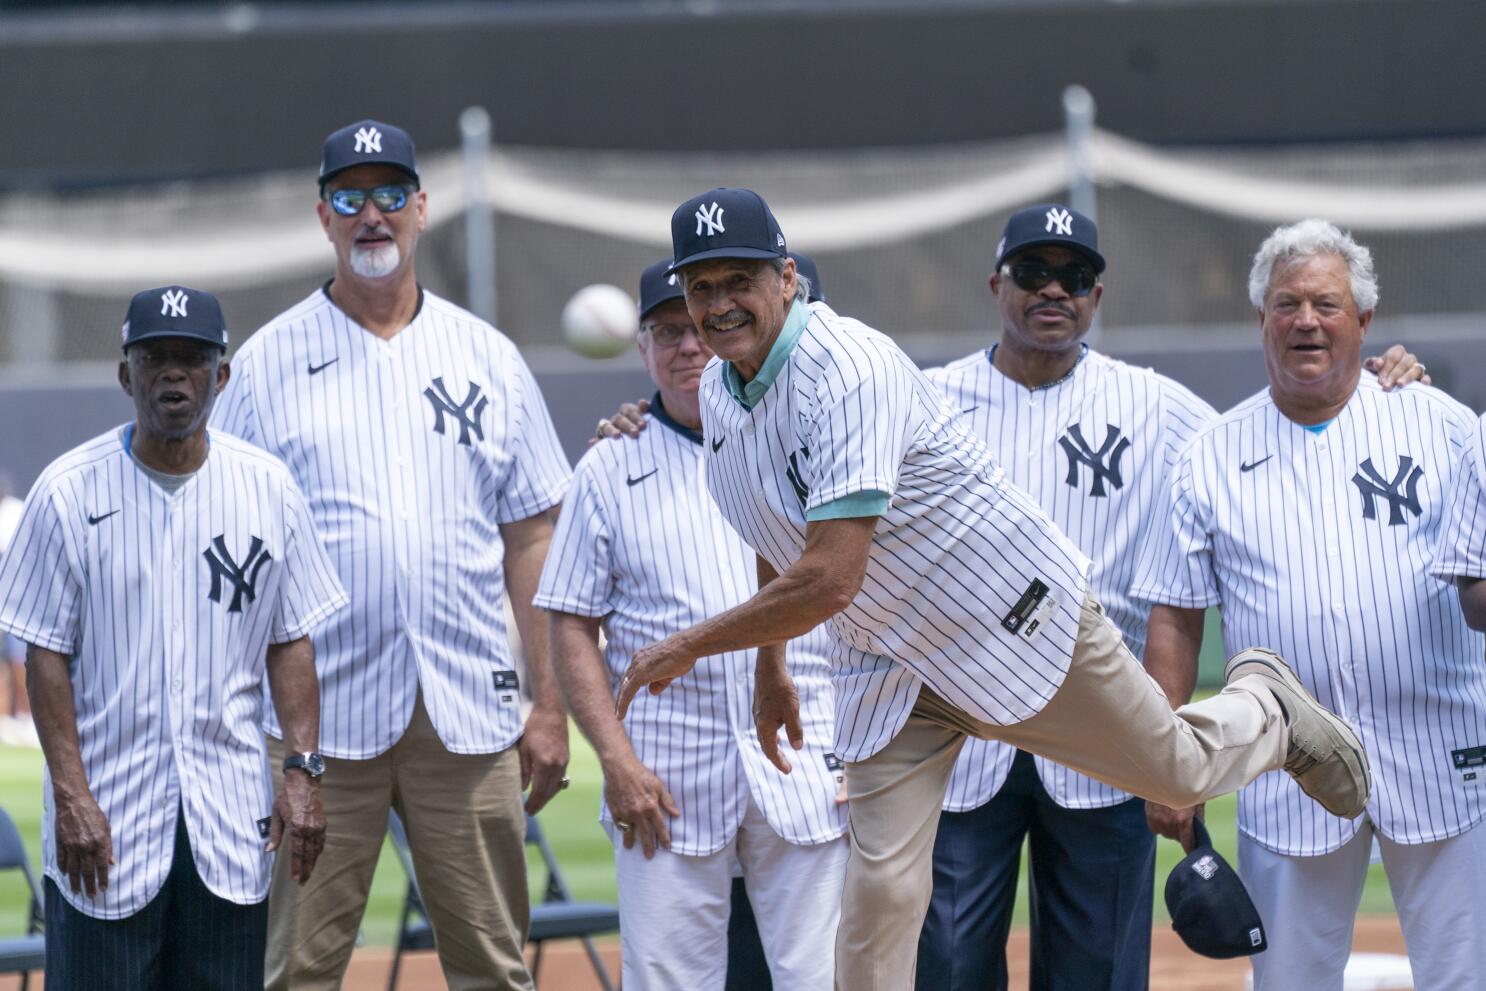 Yankees resume annual Old-Timers' Day after pandemic pause - The